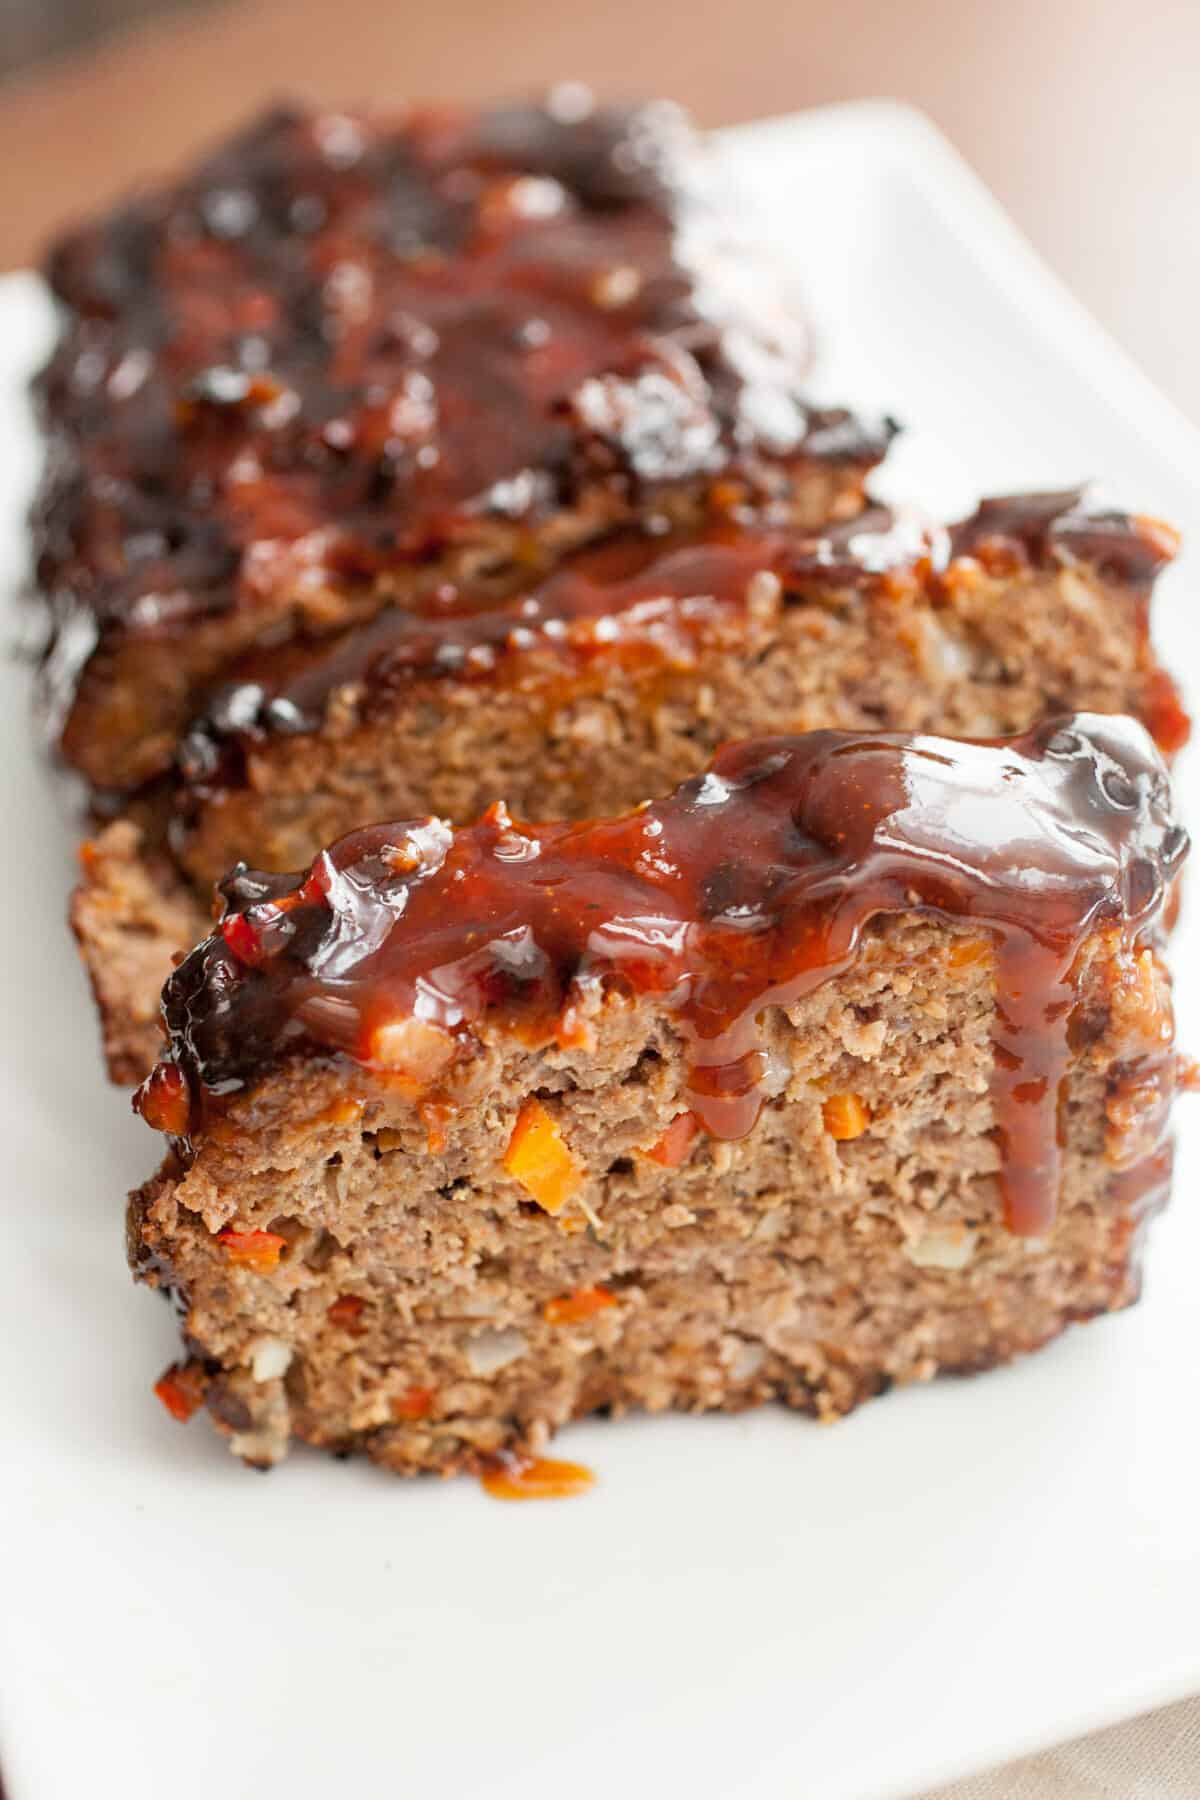 Easy Grilled Meatloaf: This perfect meatloaf is easy to make on the grill so you can keep your oven off during the hot days! The flavors are smoky and delicious! Great served with a simple salad or sliced and made into sandwiches! | macheesmo.com